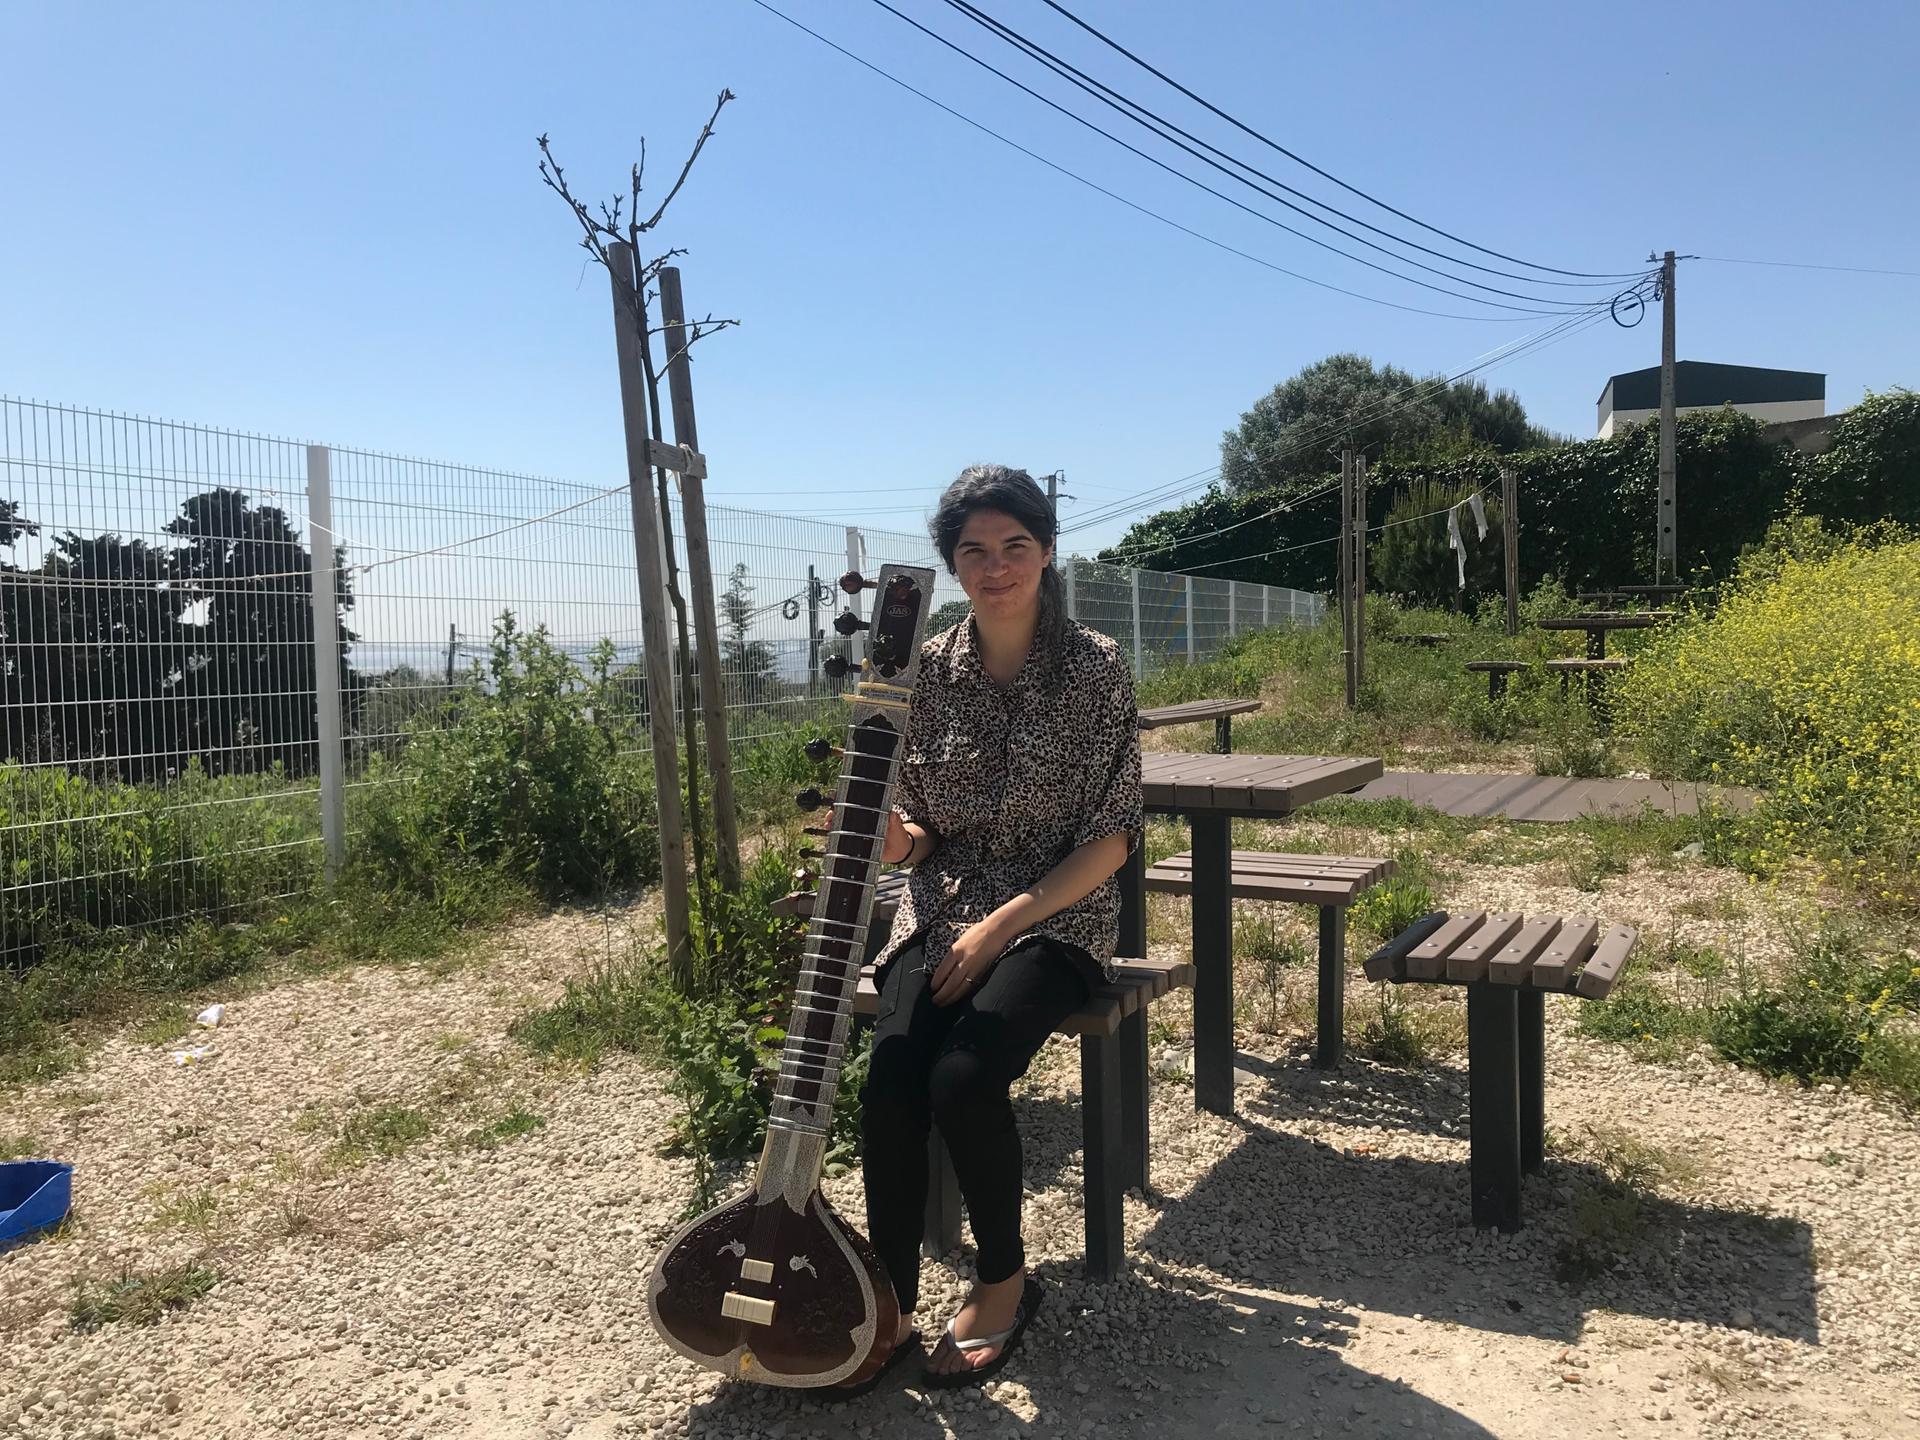 Huma Rahimi with her new sitar on the terrace at the refugee center outside Lisbon where she is staying. 